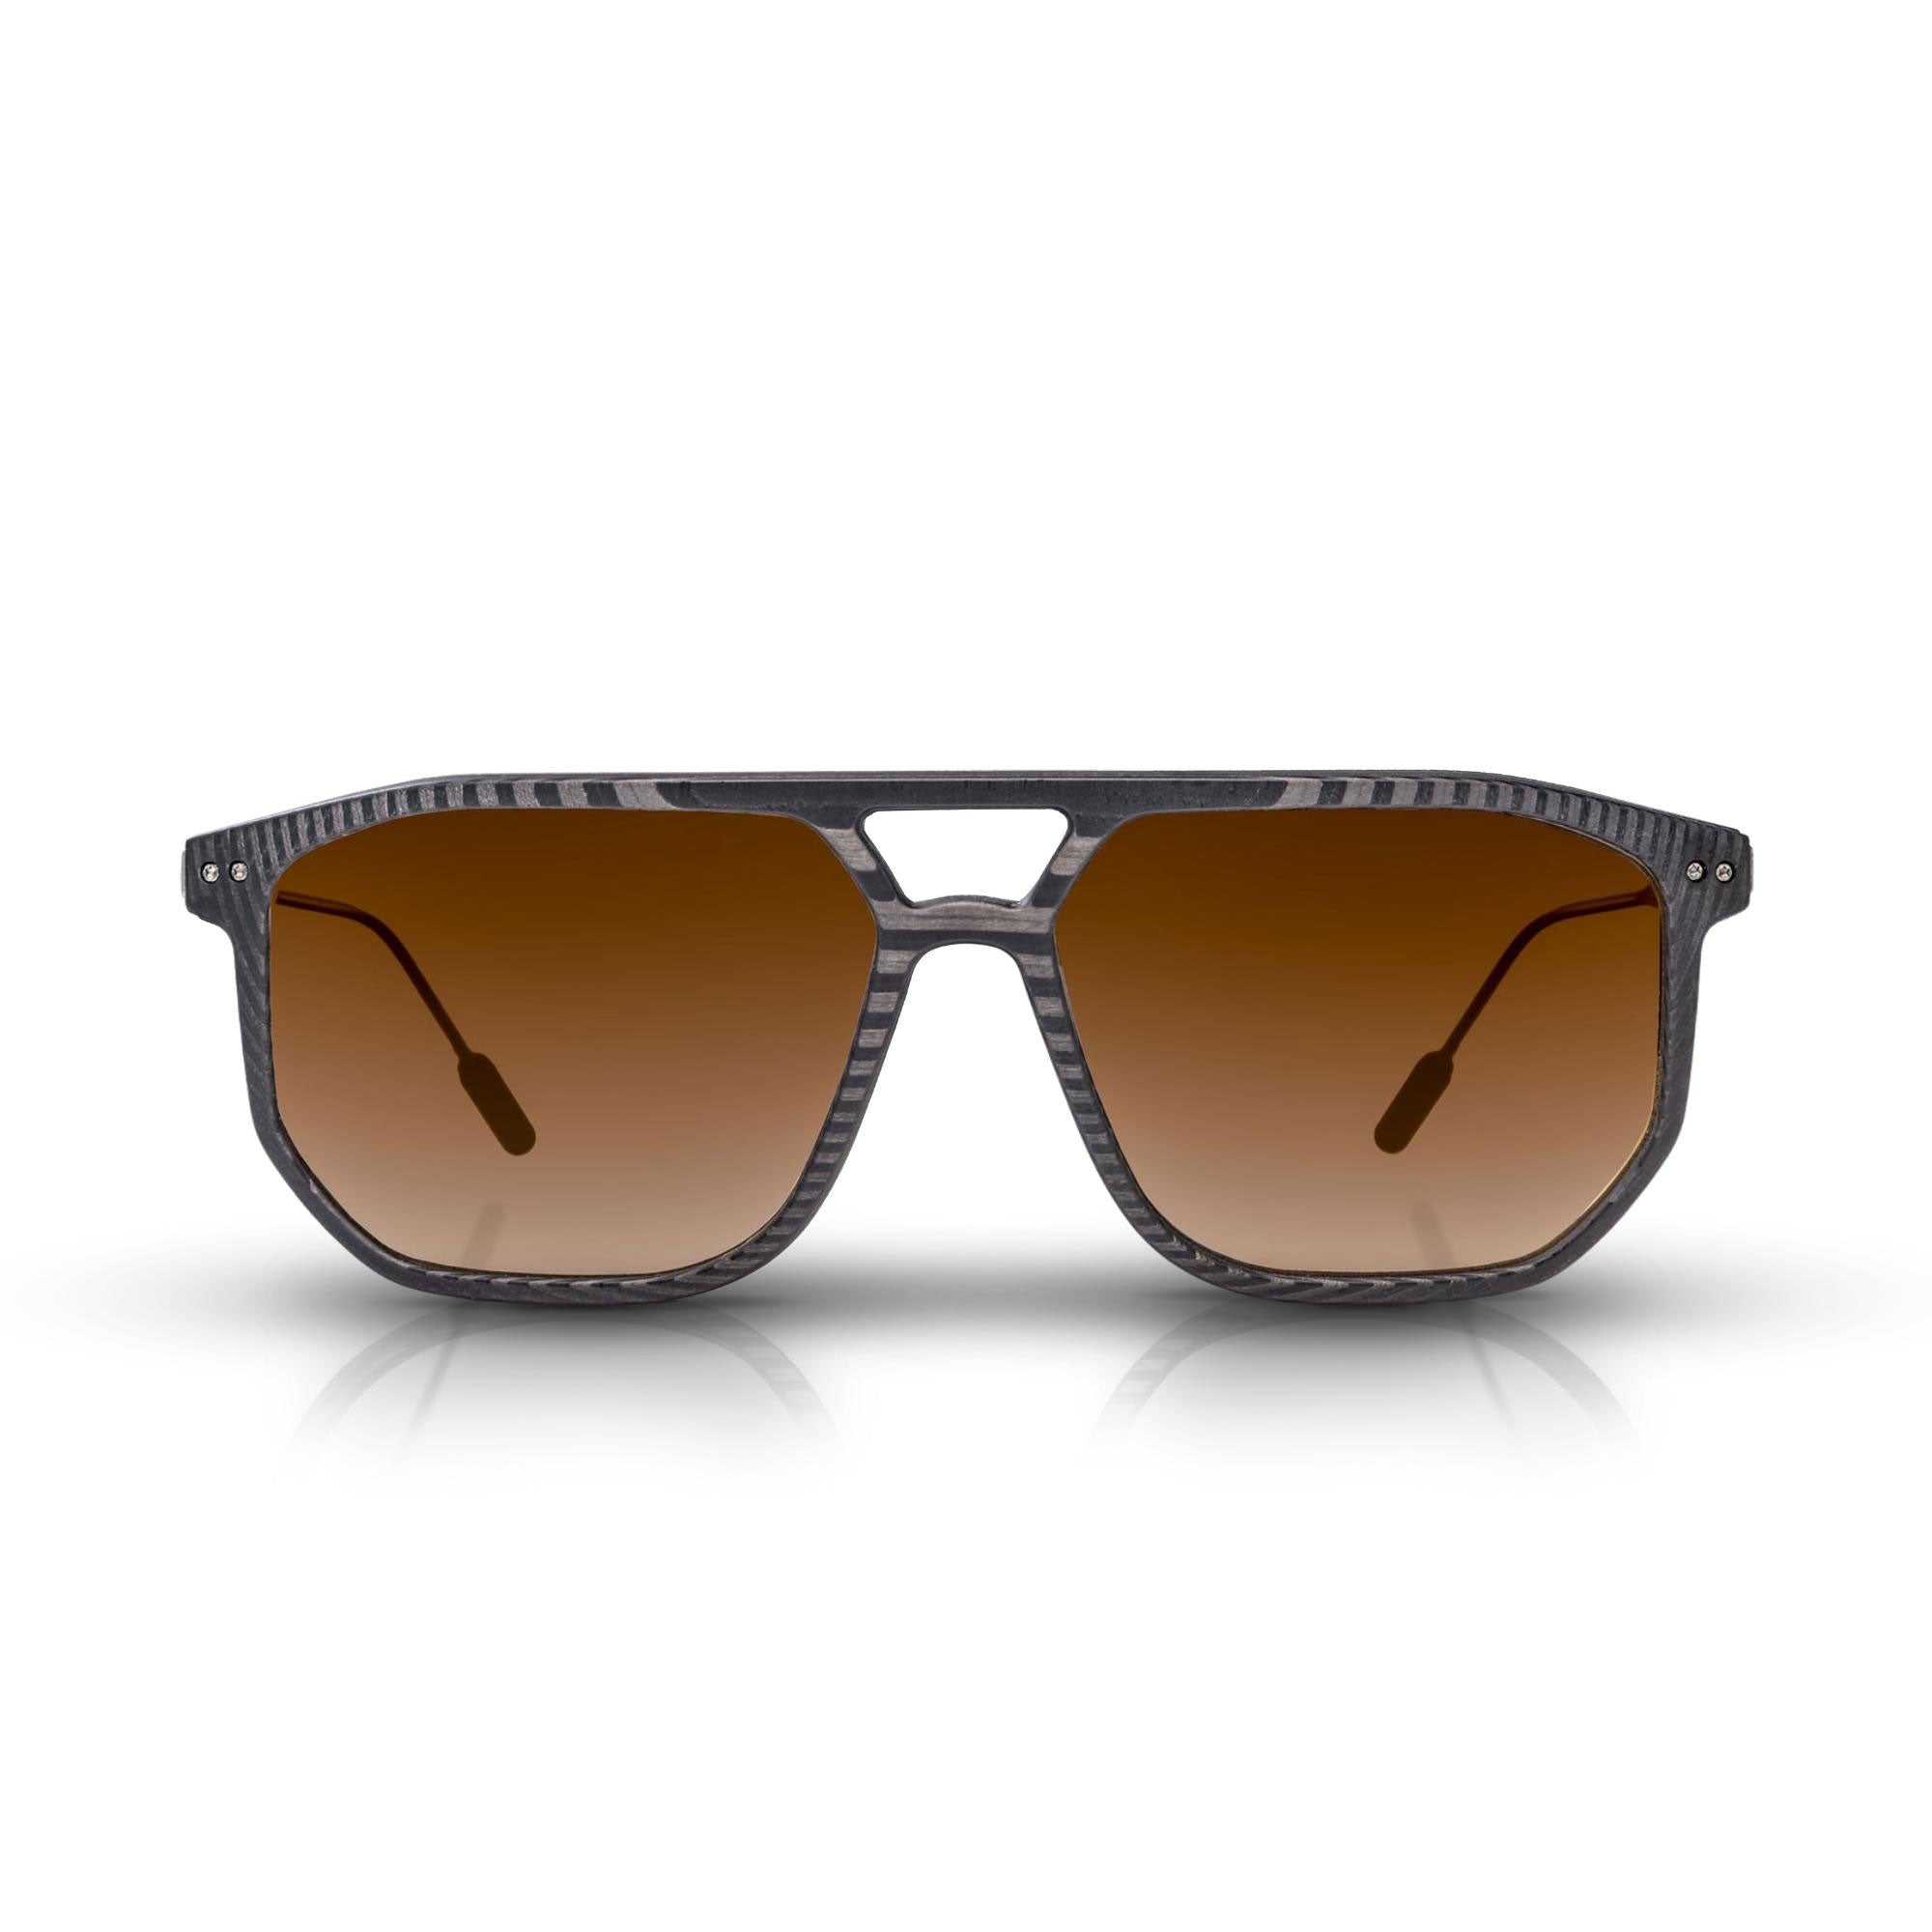 Front of the latest Roveri Eyewear The Sterling Bronze from the latest Gunther Werks Collection, vintage squared Pilot inspired sunglasses for men in UDCT® Machined Carbon Fiber, with light blue gradient lenses and satin Beta-Titanium frame, handmade in Italy.